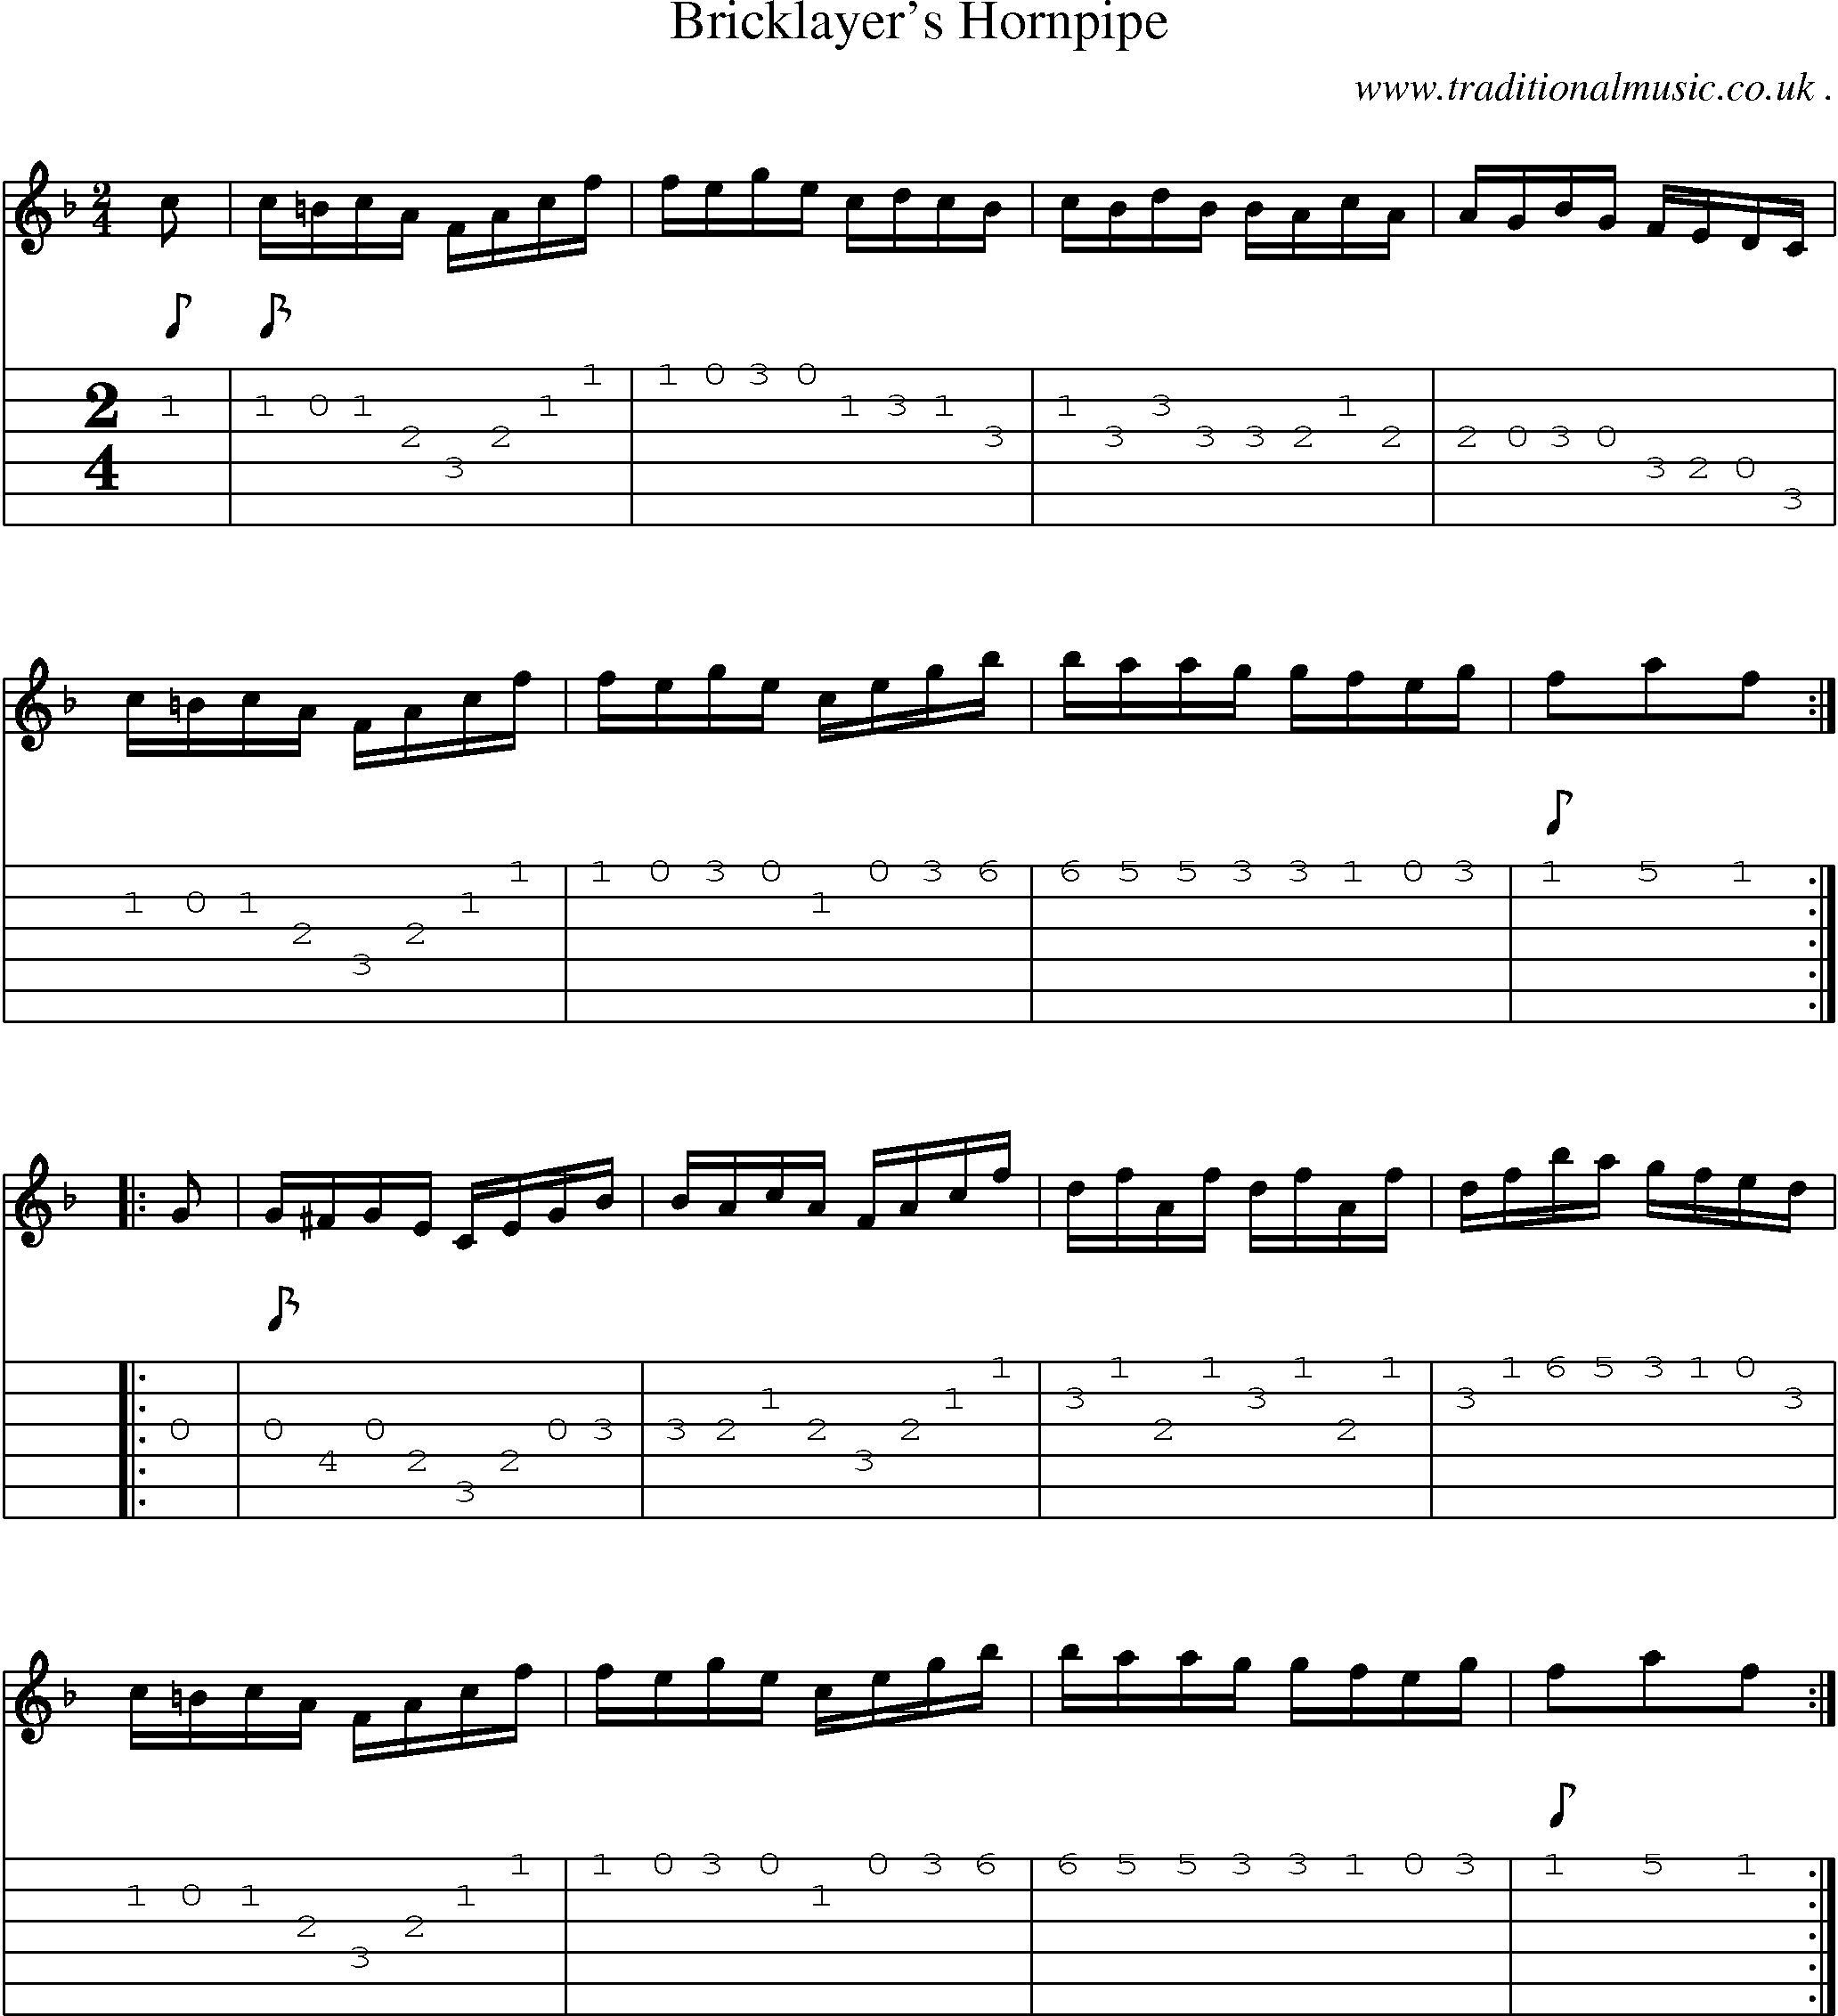 Sheet-Music and Guitar Tabs for Bricklayers Hornpipe